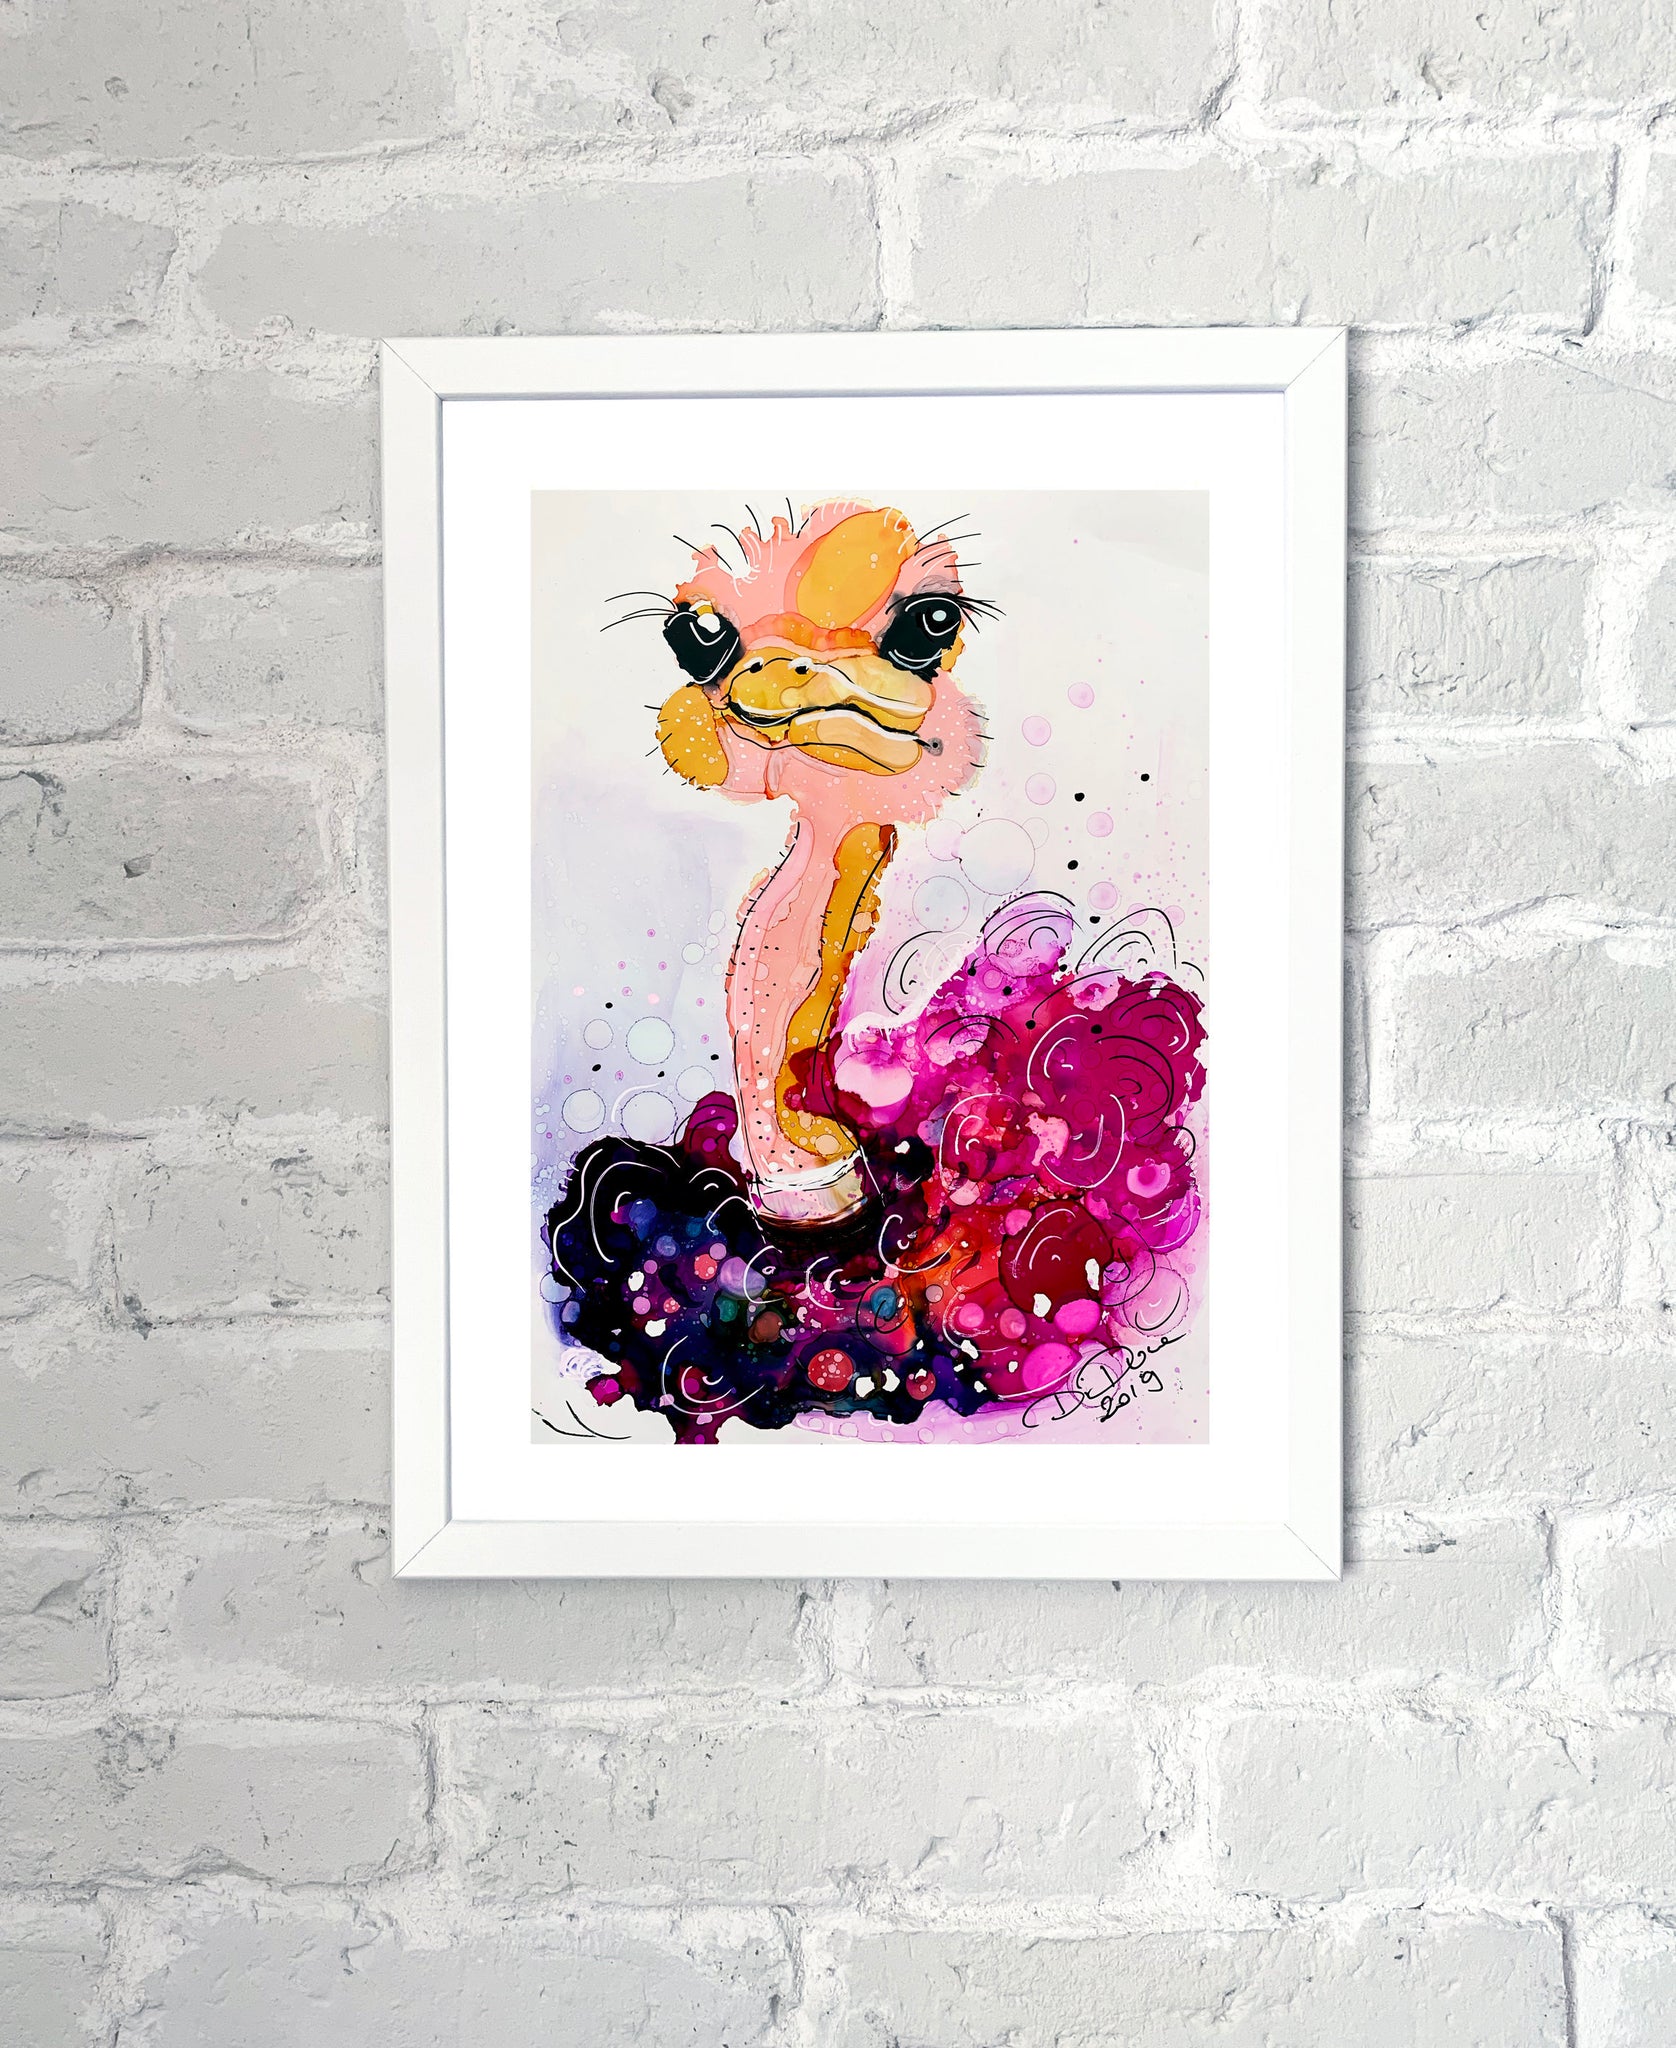 Colourful ostrich - Alcohol Ink Painting on Yupo Paper – didART studio